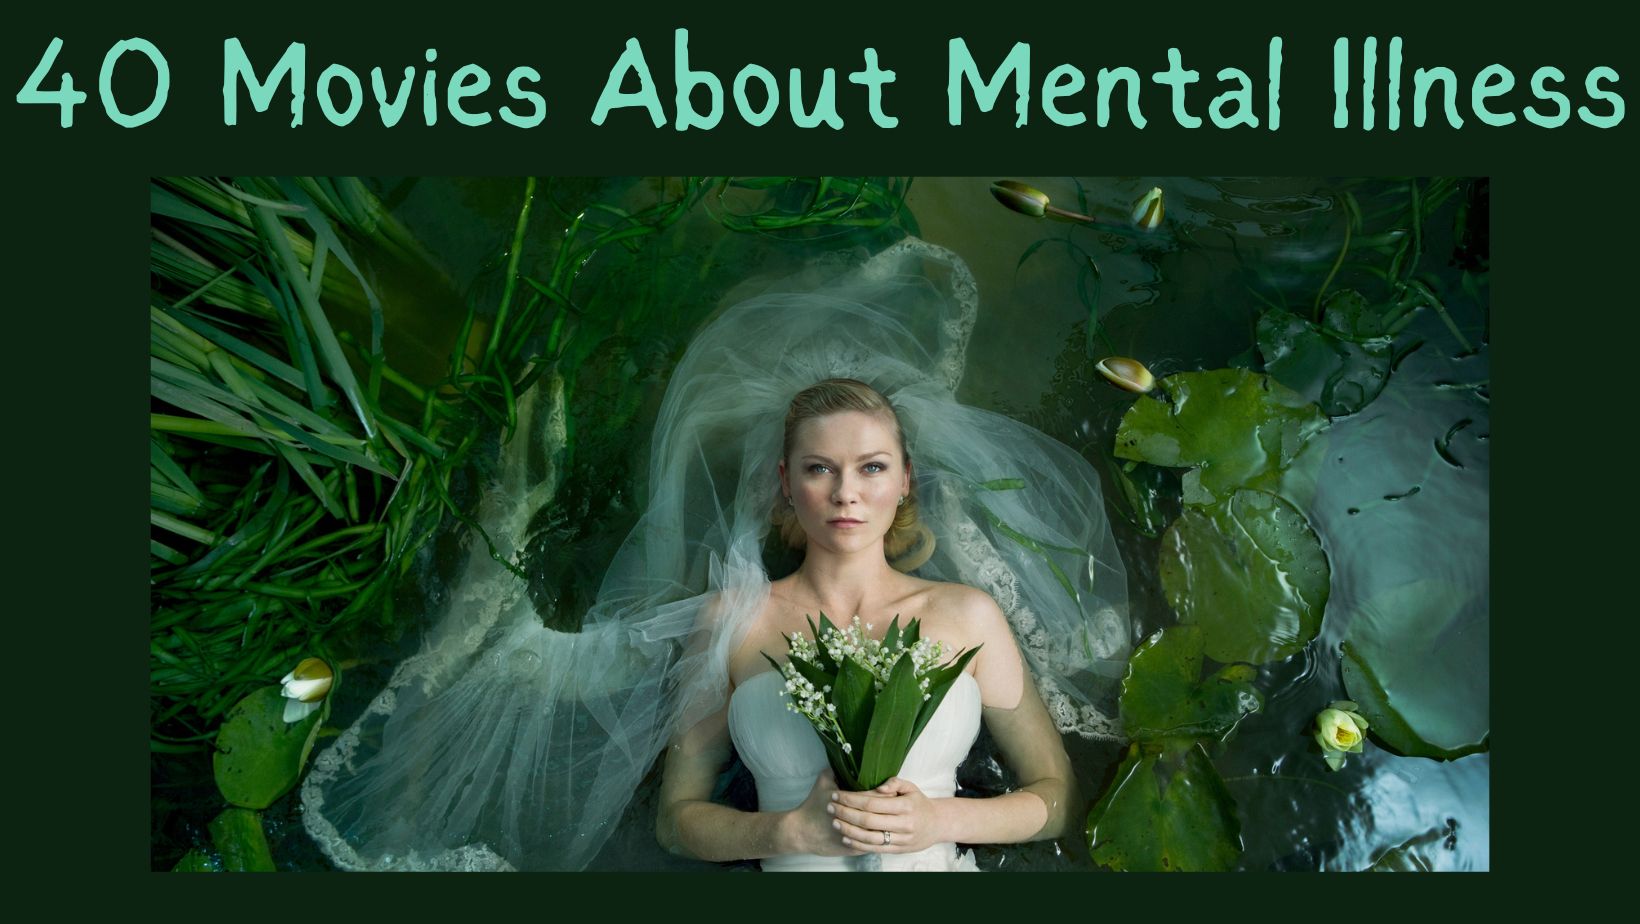 image from movie "melancholia" in color dark emerald green. text "40 movies about mental illness"